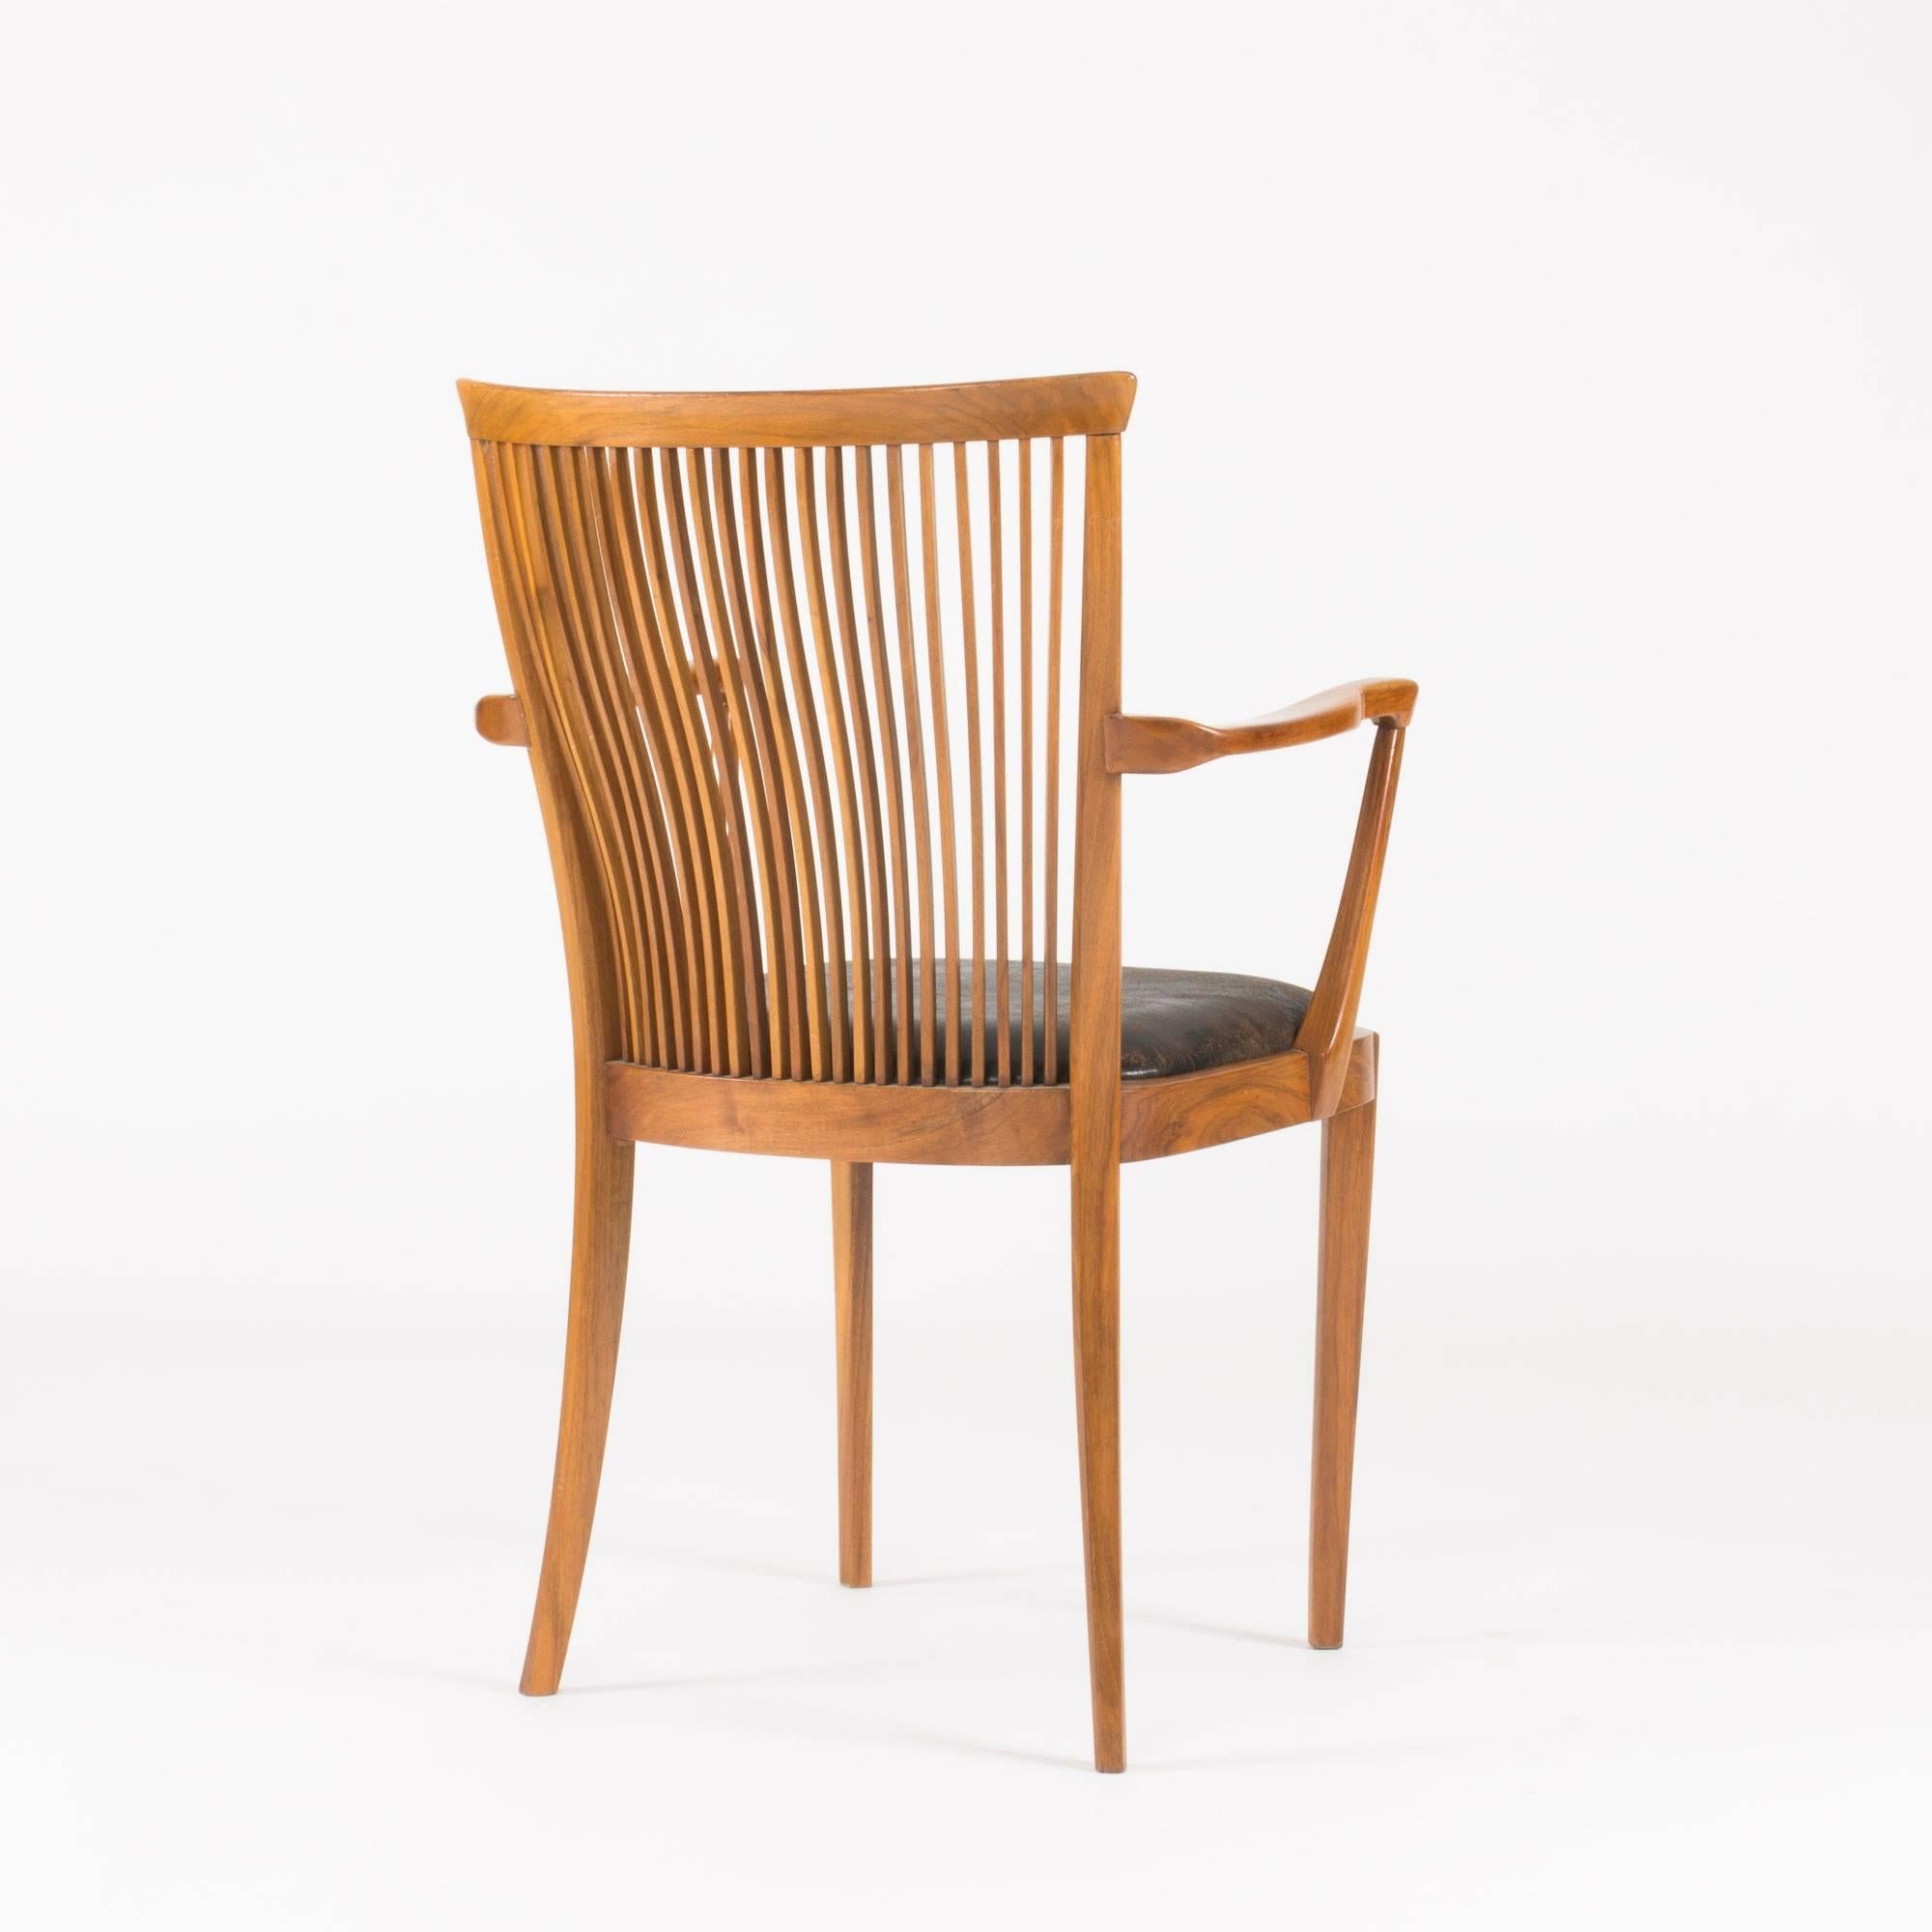 Scandinavian Modern Walnut and Leather Armchair by Carl-Axel Acking